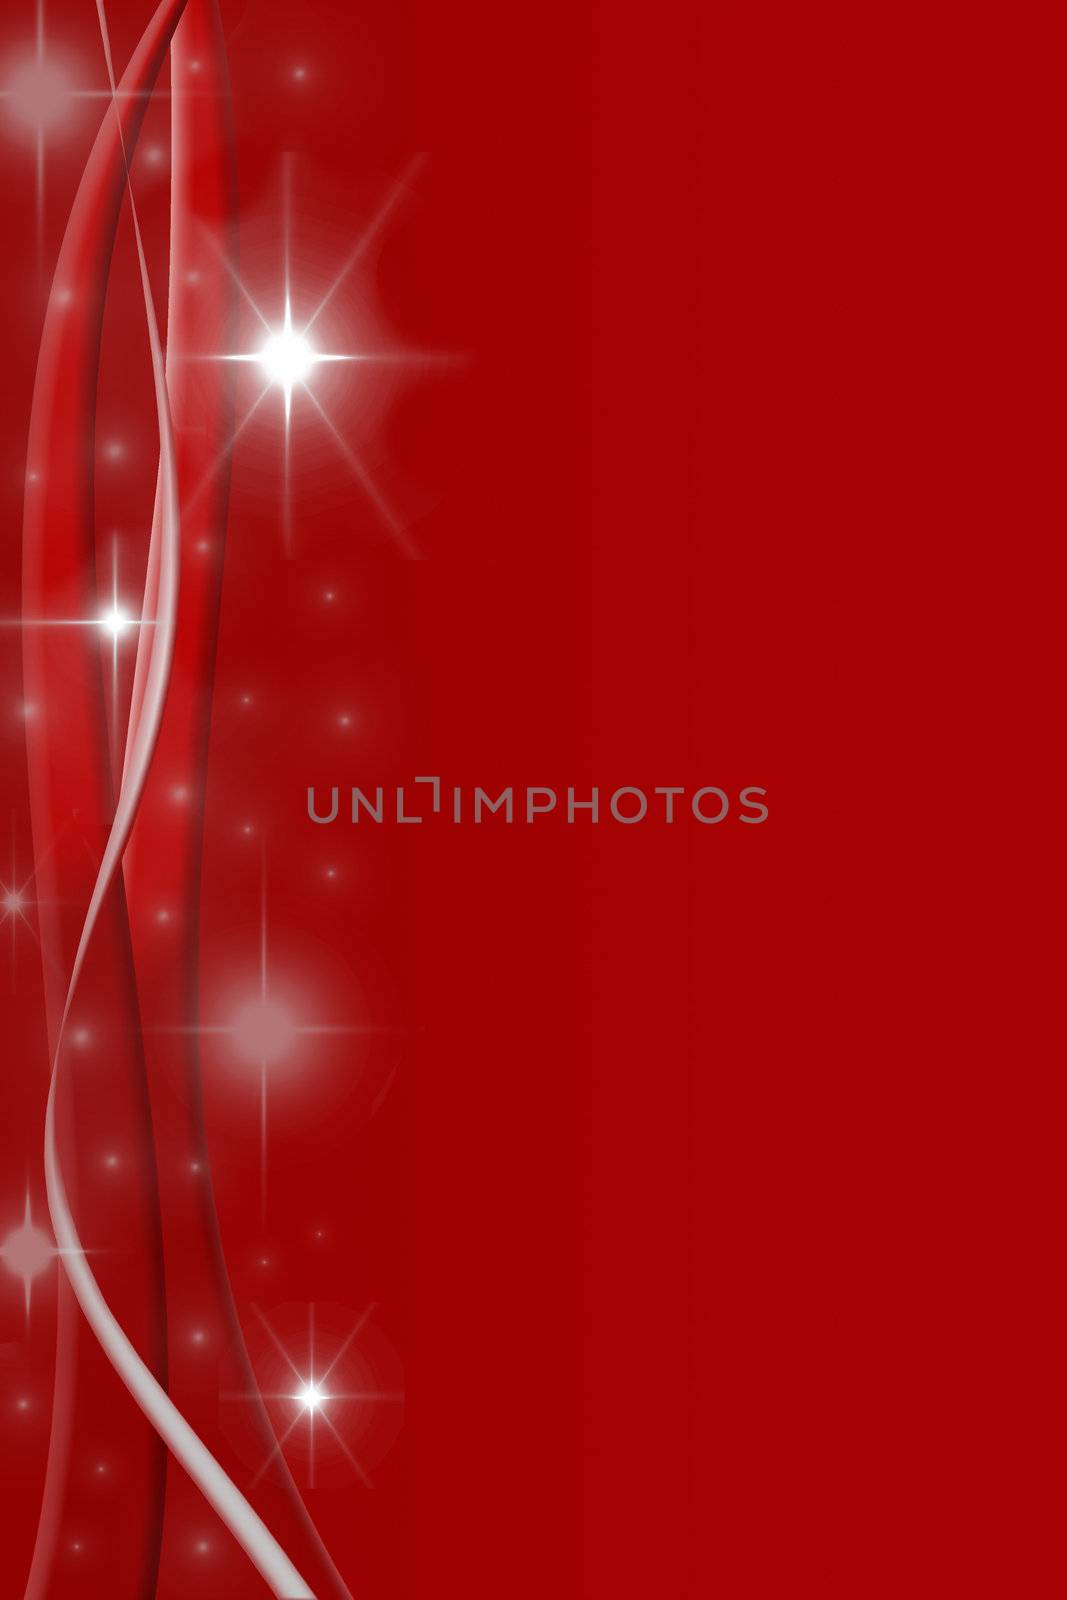 christmas background for your designs in red with swirls and snowflakes